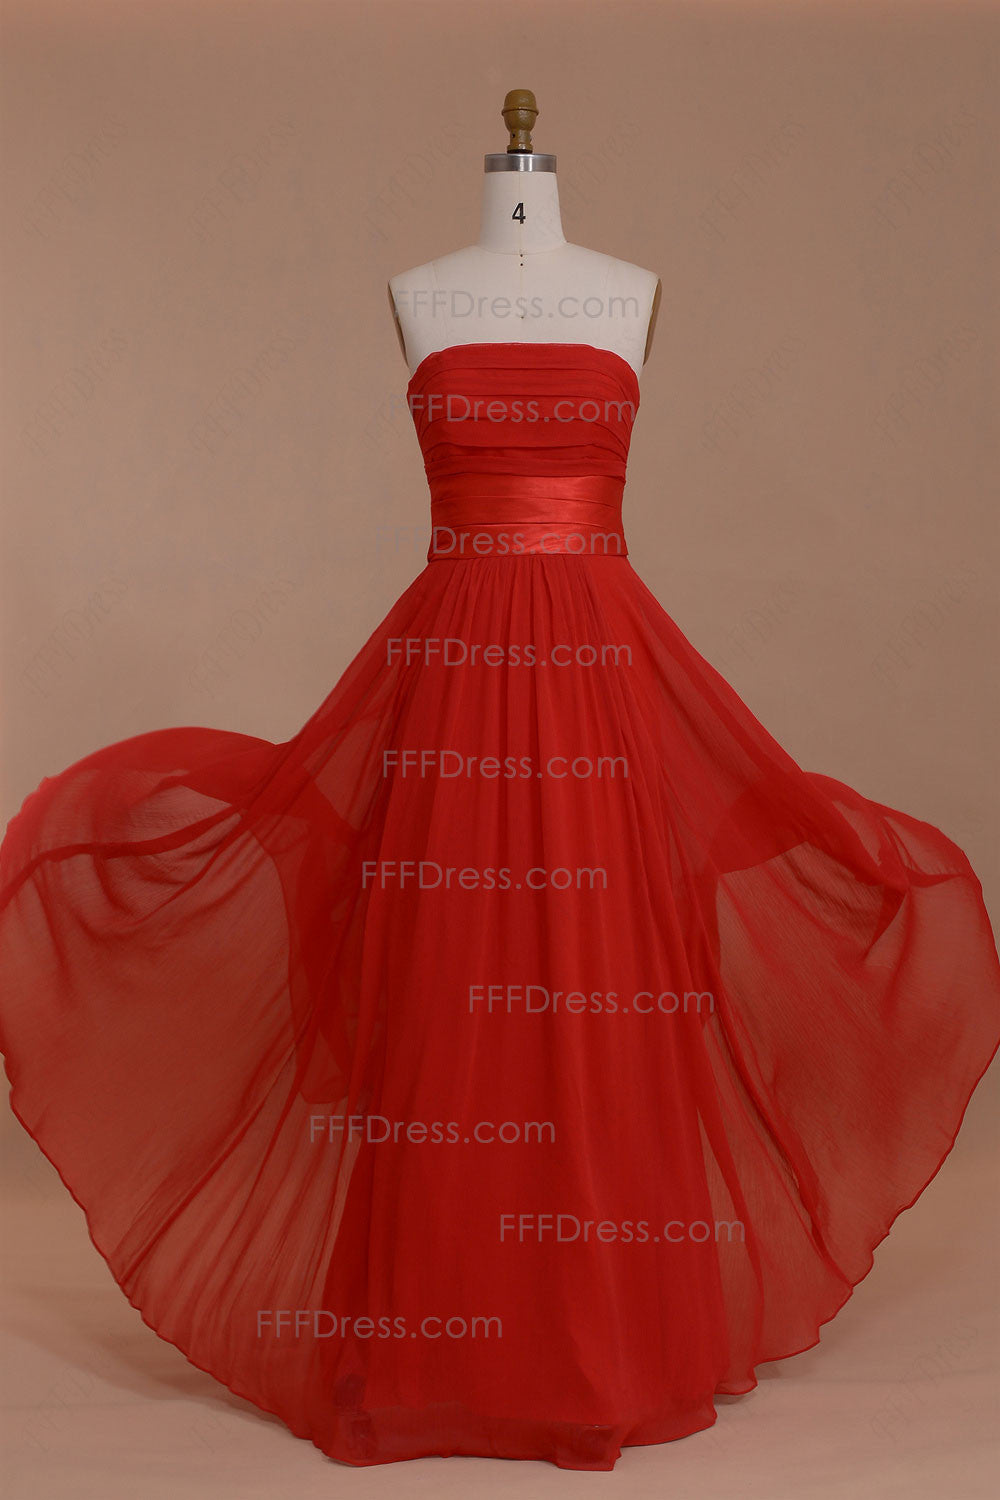 Strapless red bridesmaid dresses long